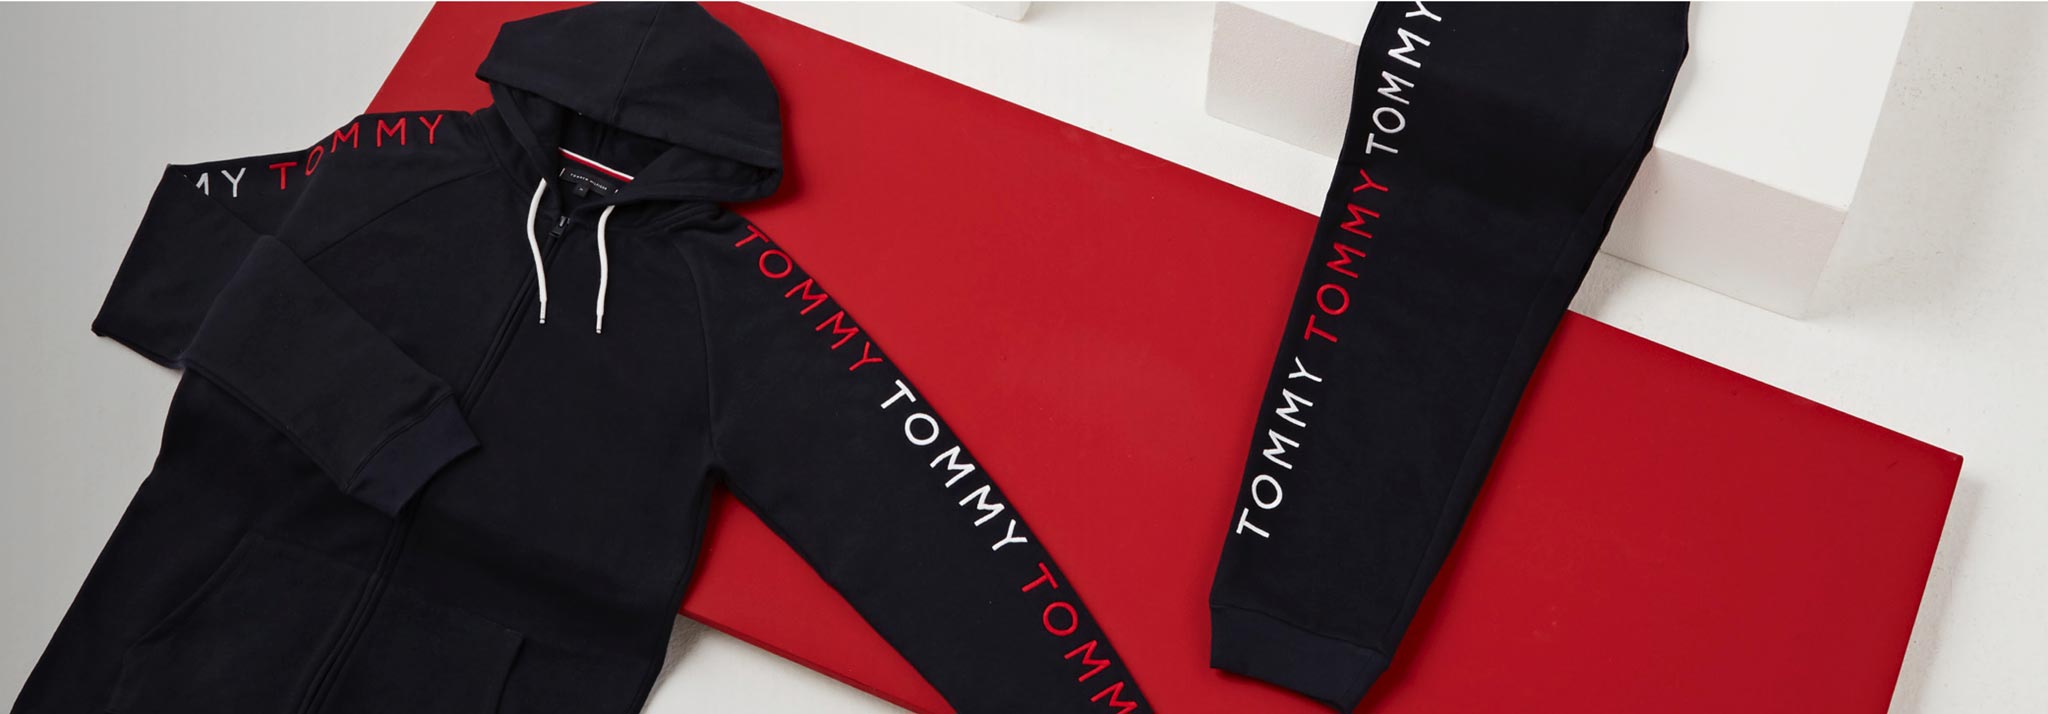 tommy hilfiger site official